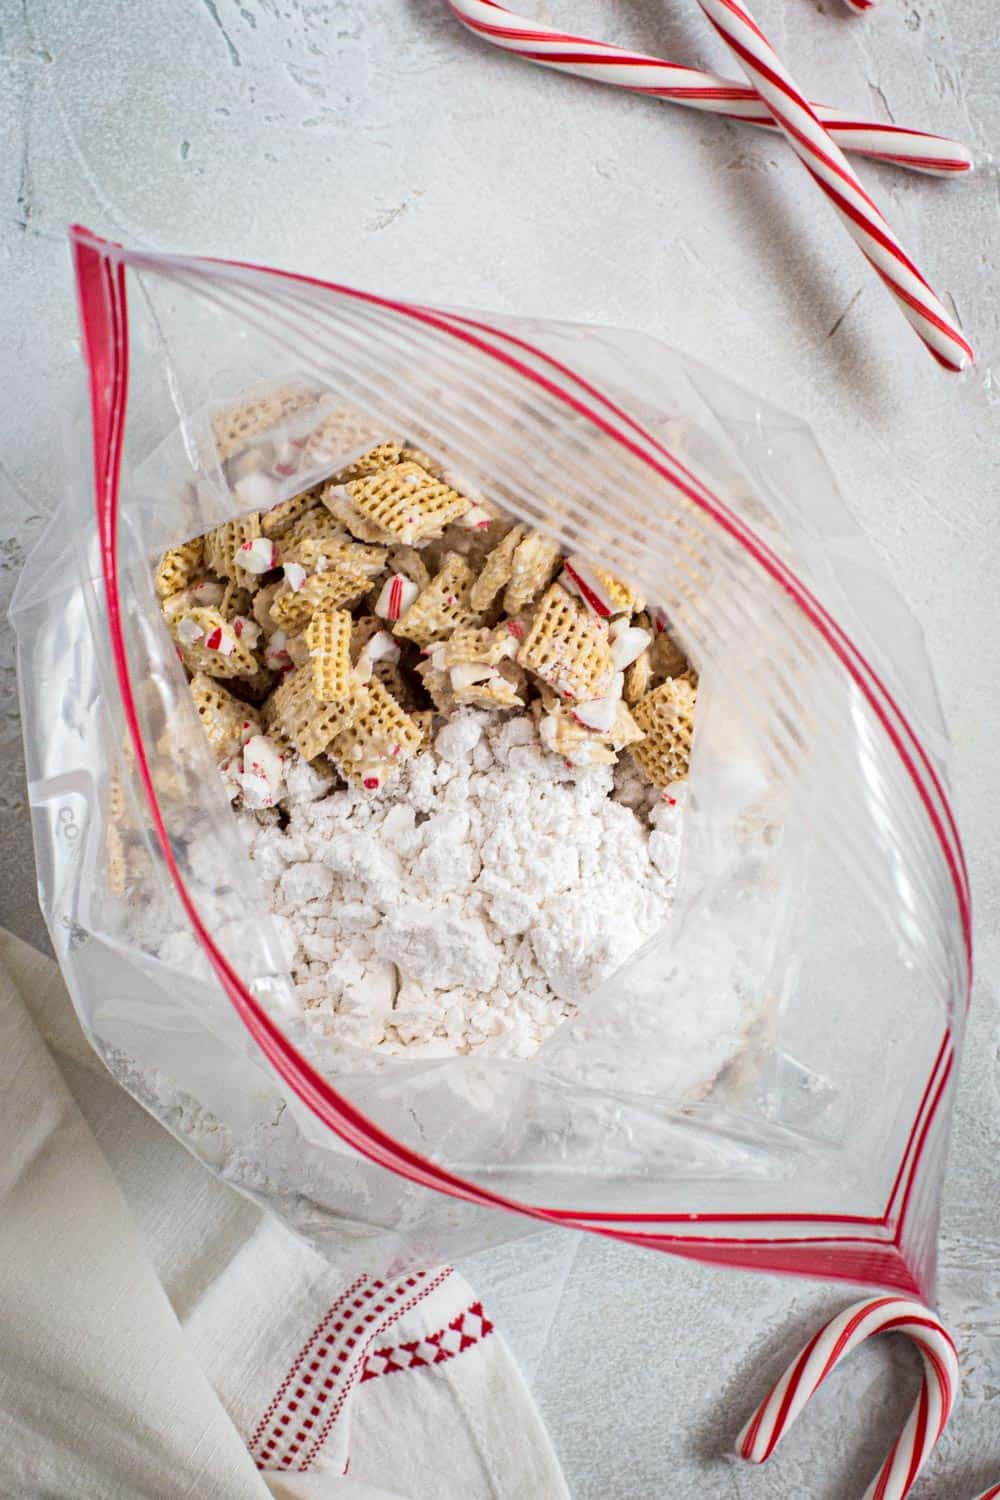 Ziplock bag with puppy chow ingredients.